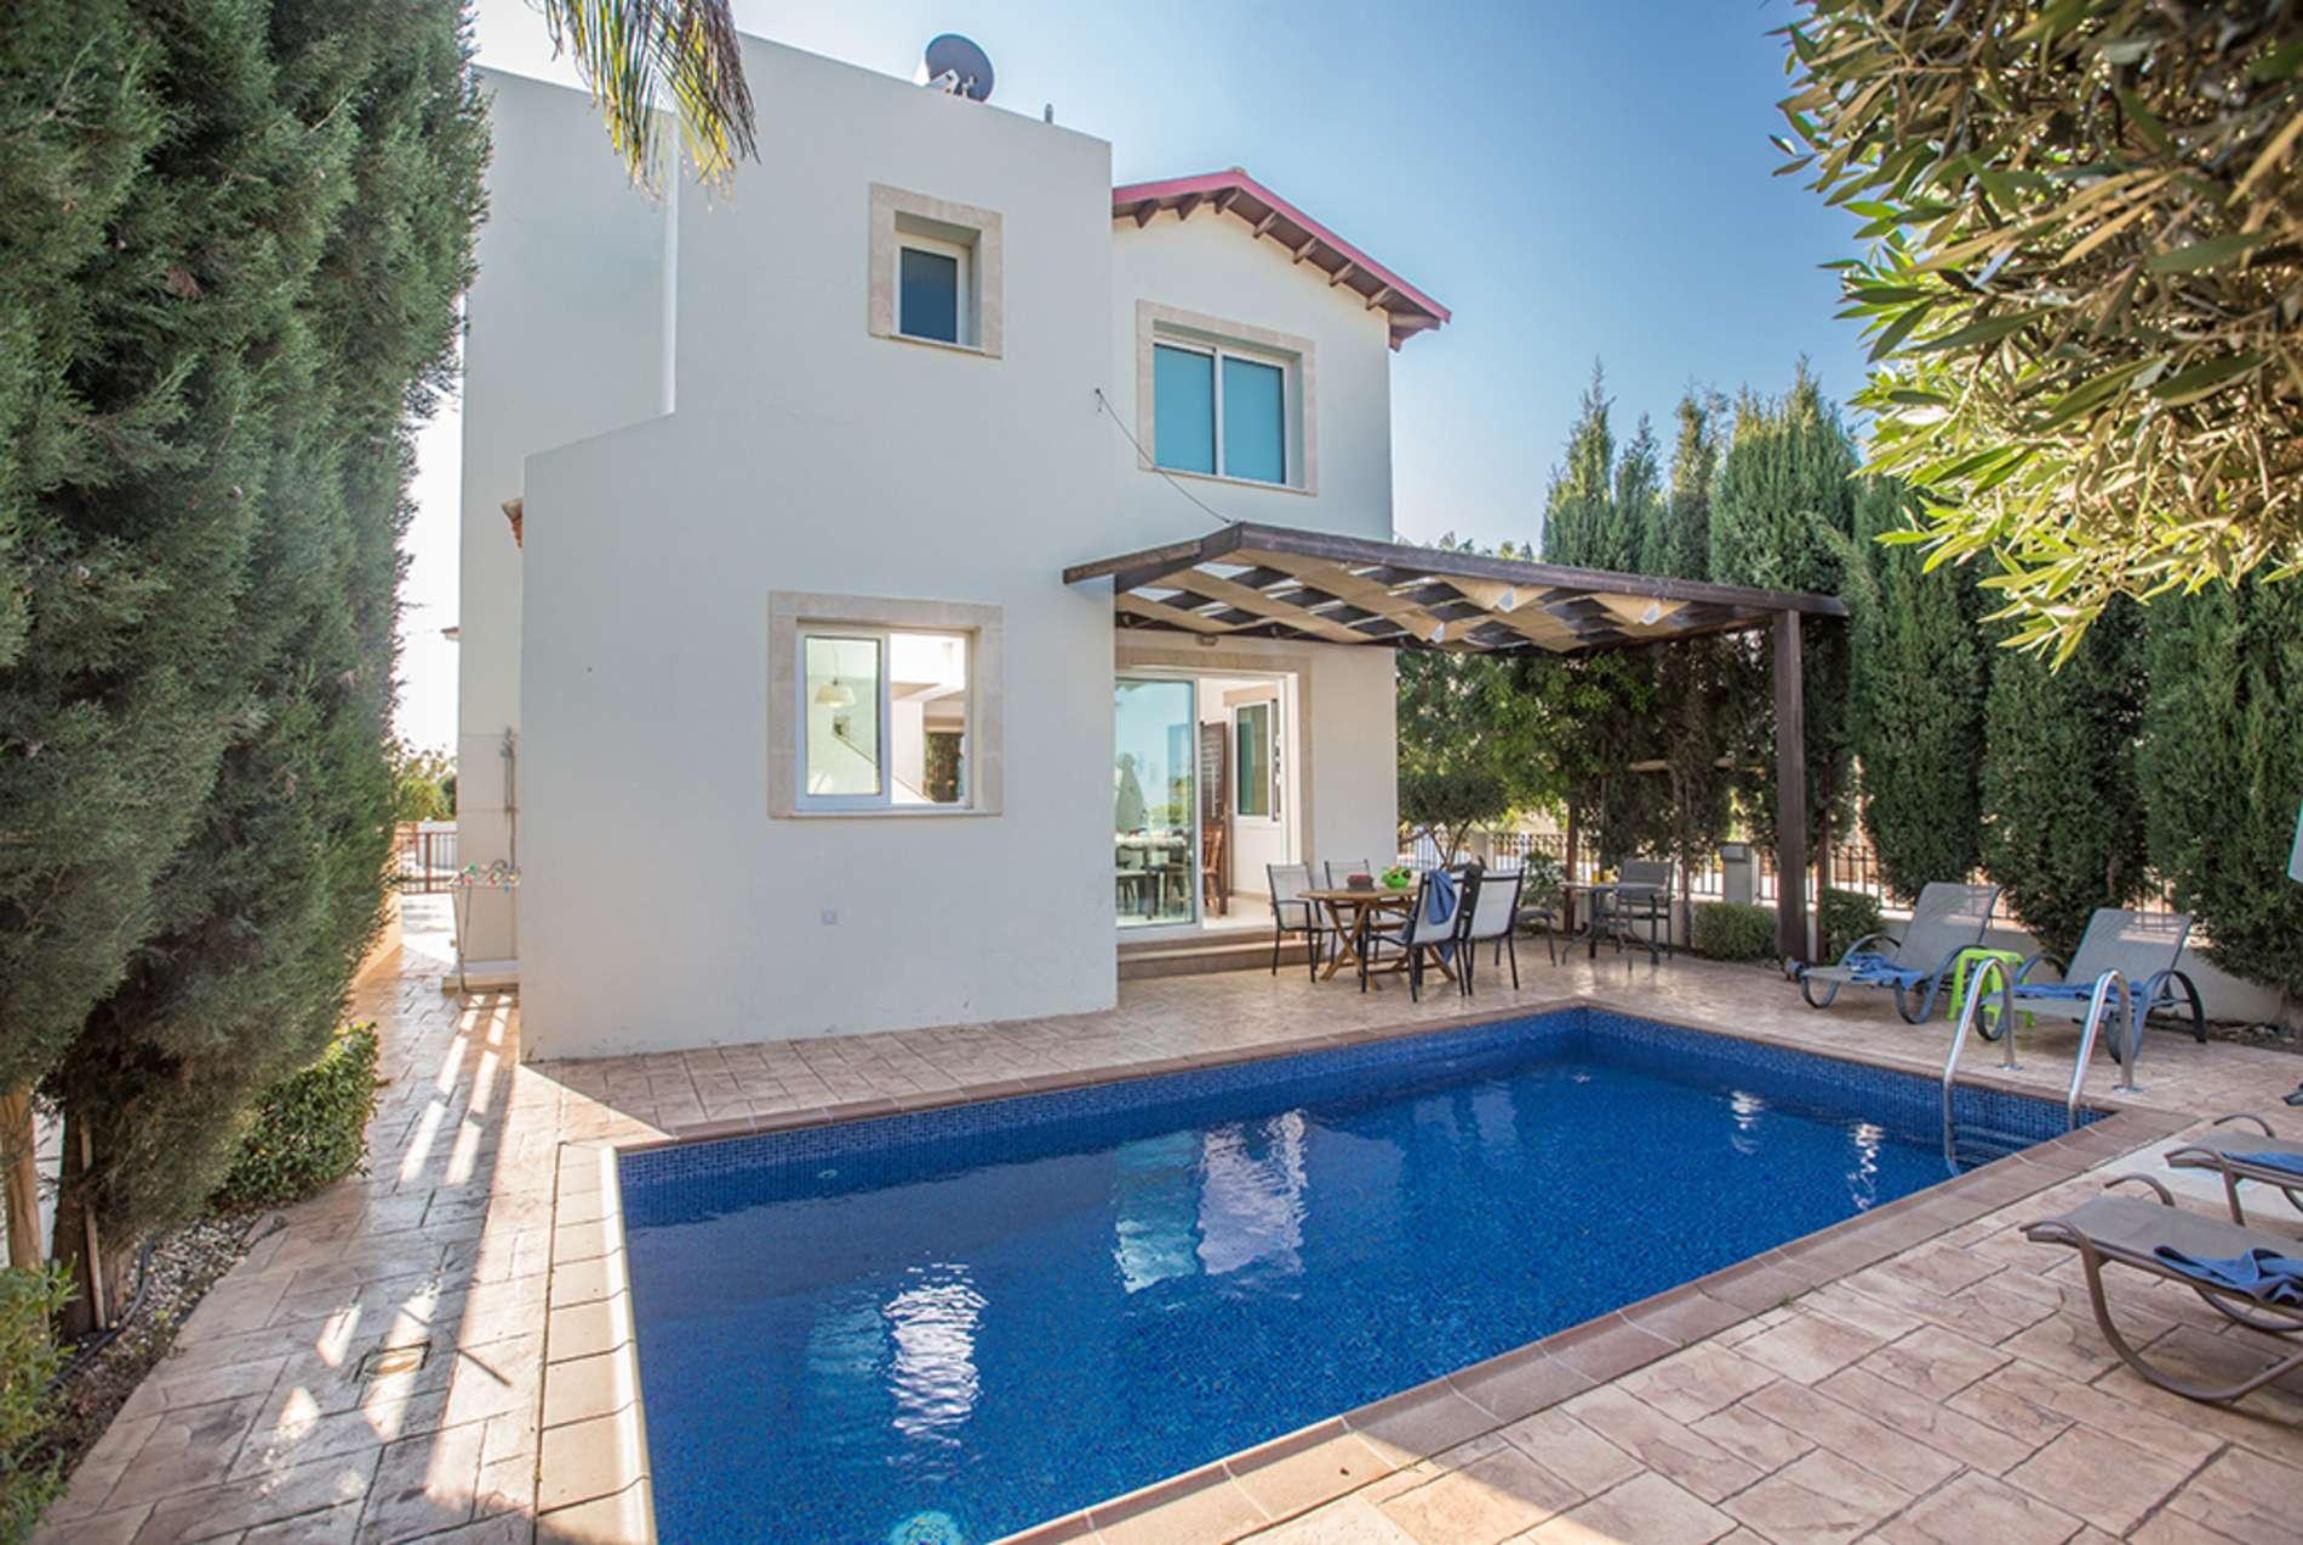 Property Image 1 - Lovely villa perfect for families, great location